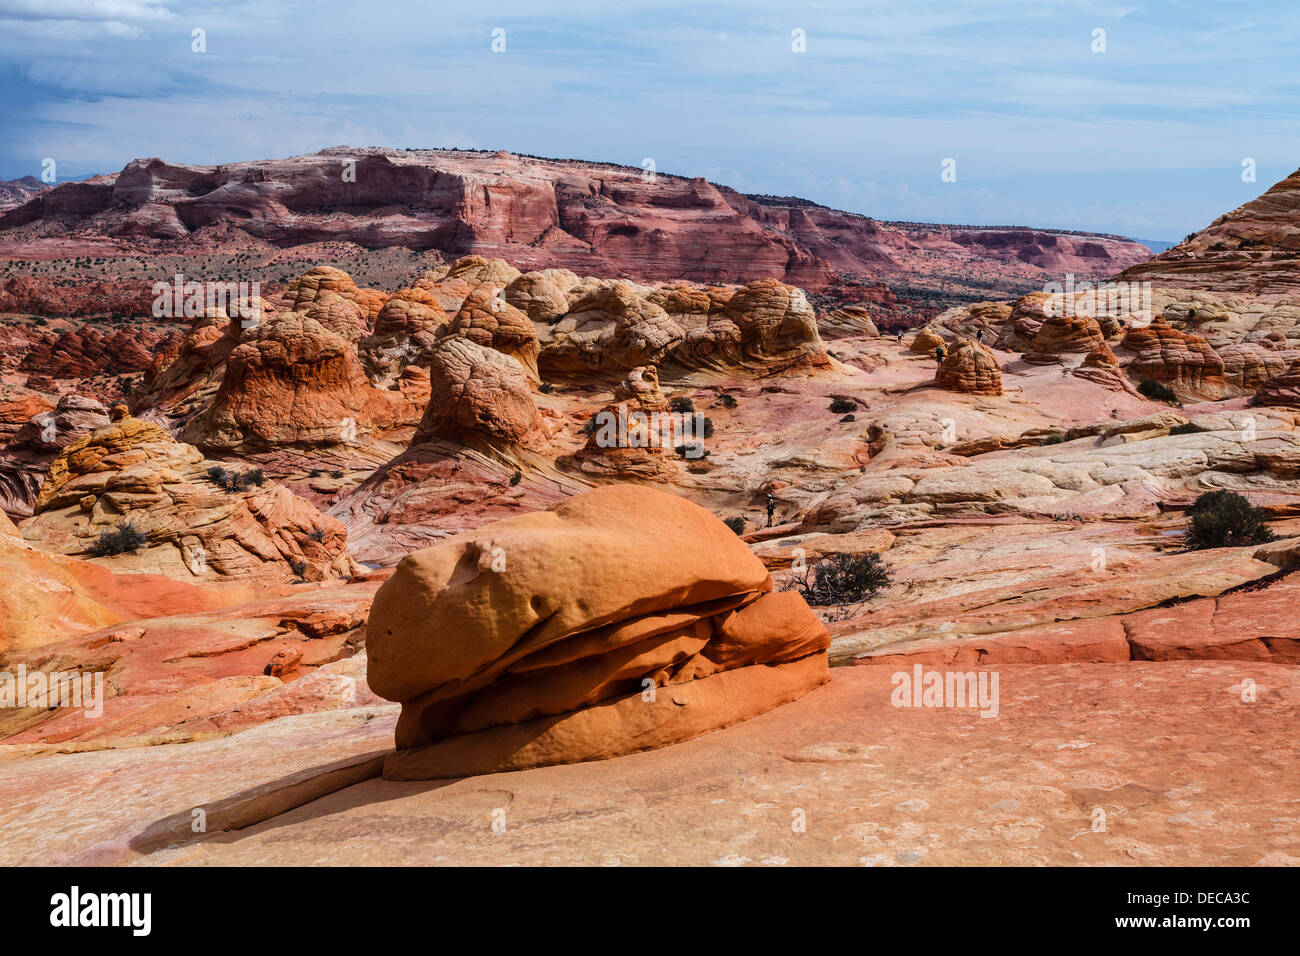 'Burger King', an interesting rock formation that resembles a giant burger located at Coyote Buttes North Stock Photo